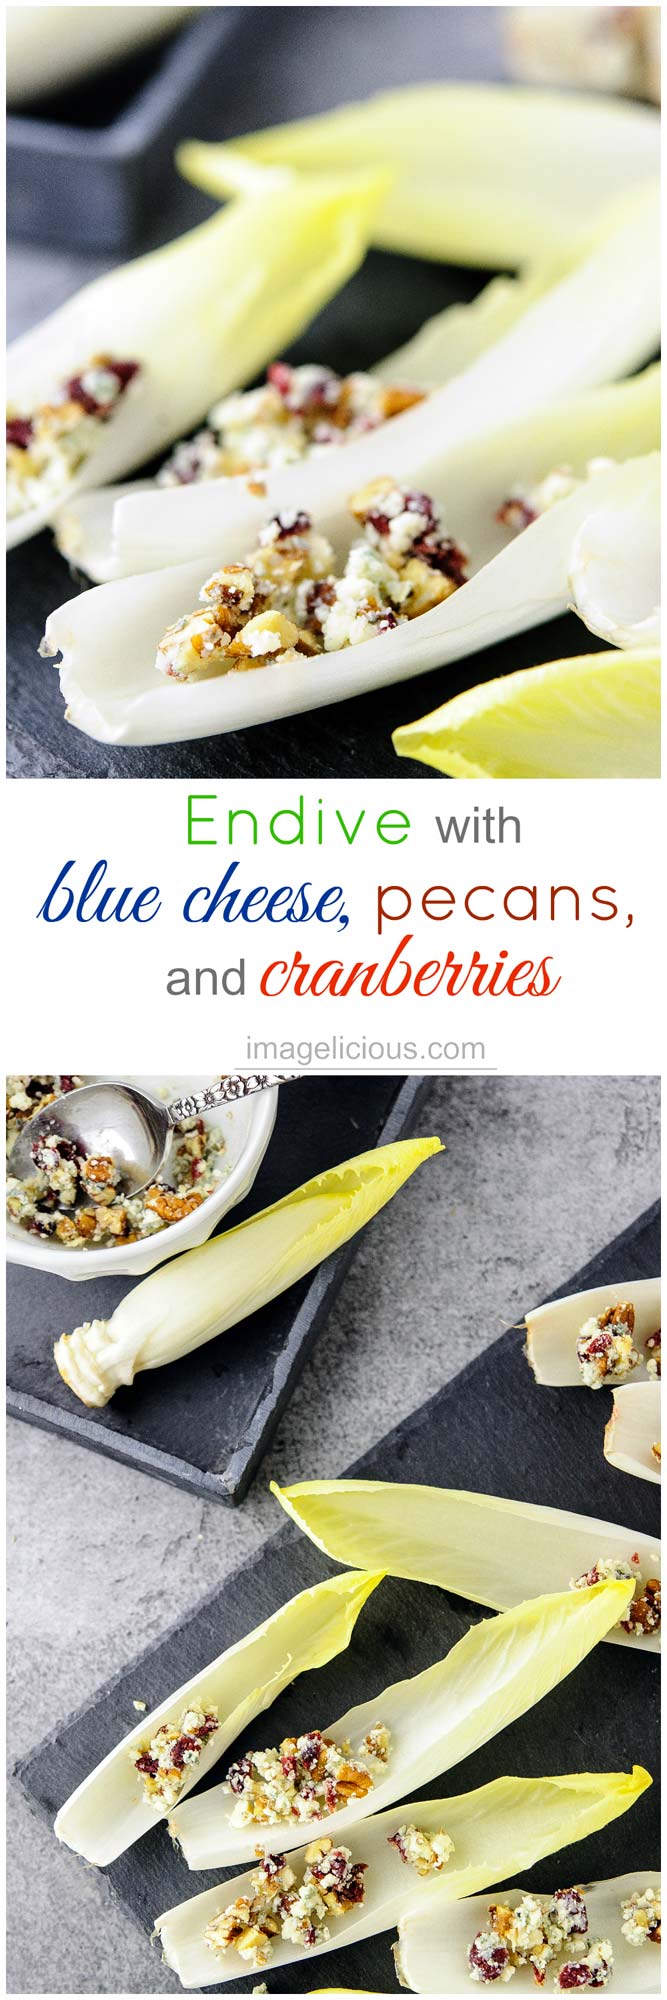 Easy and quick endive appetizer with blue cheese, pecans, and cranberries is a delicious and elegant appetizer for a weeknight dinner or a big party. It takes only minutes to make and can be prepared in advance | imagelicious.com #endive #appetizer #party 